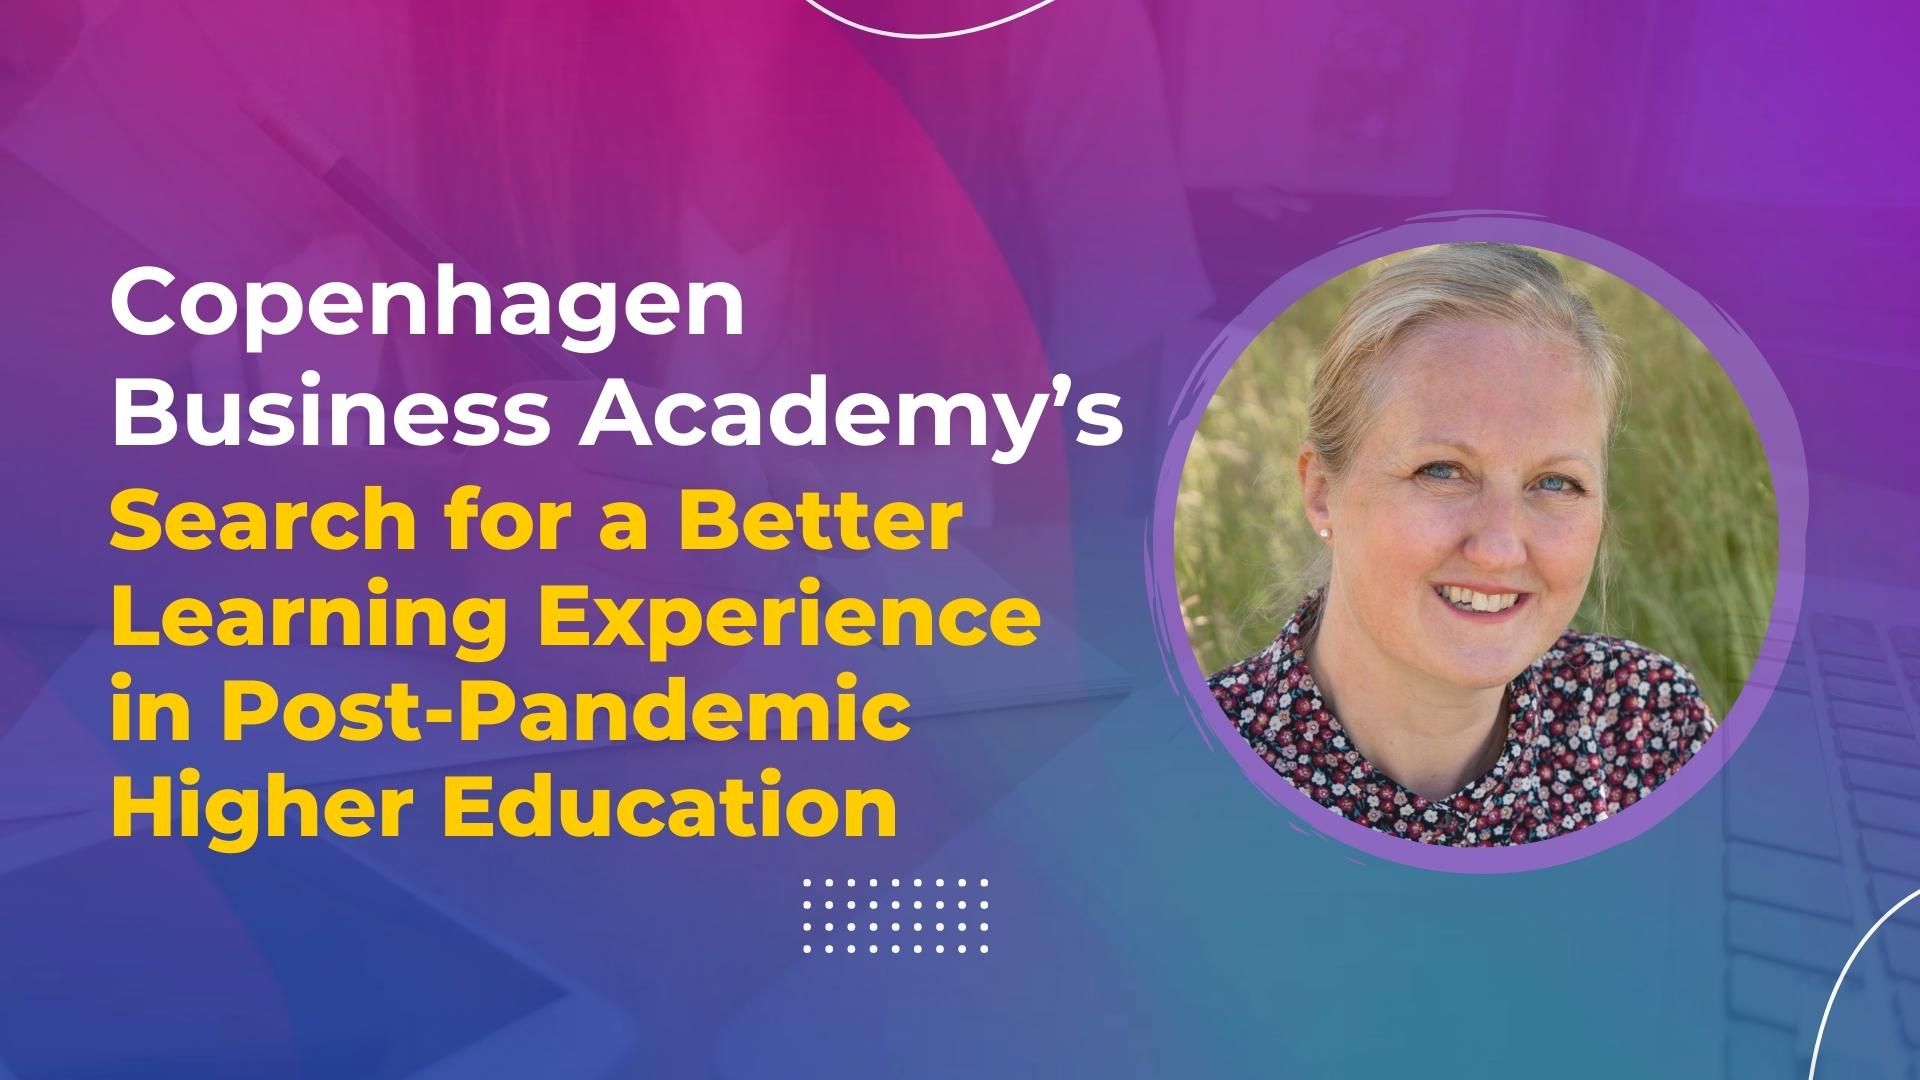 Copenhagen Business Academy’s Search for a Better Learning Experience in Post-Pandemic Higher Education